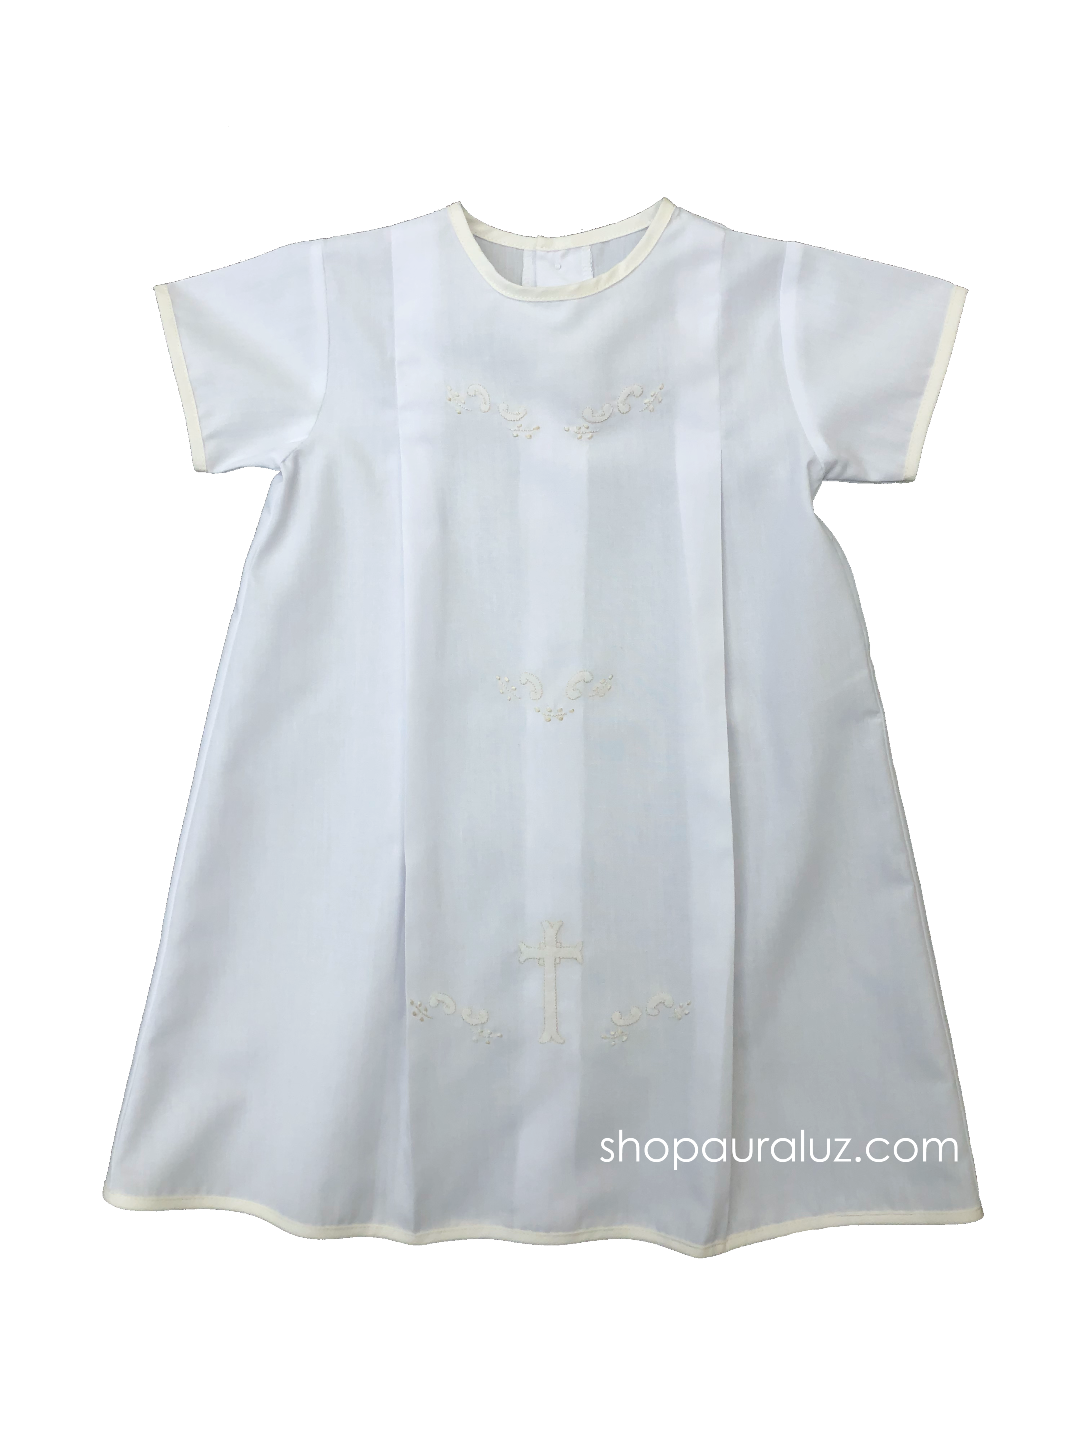 Auraluz Day Gown...White with ecru binding trim and embroidered cross